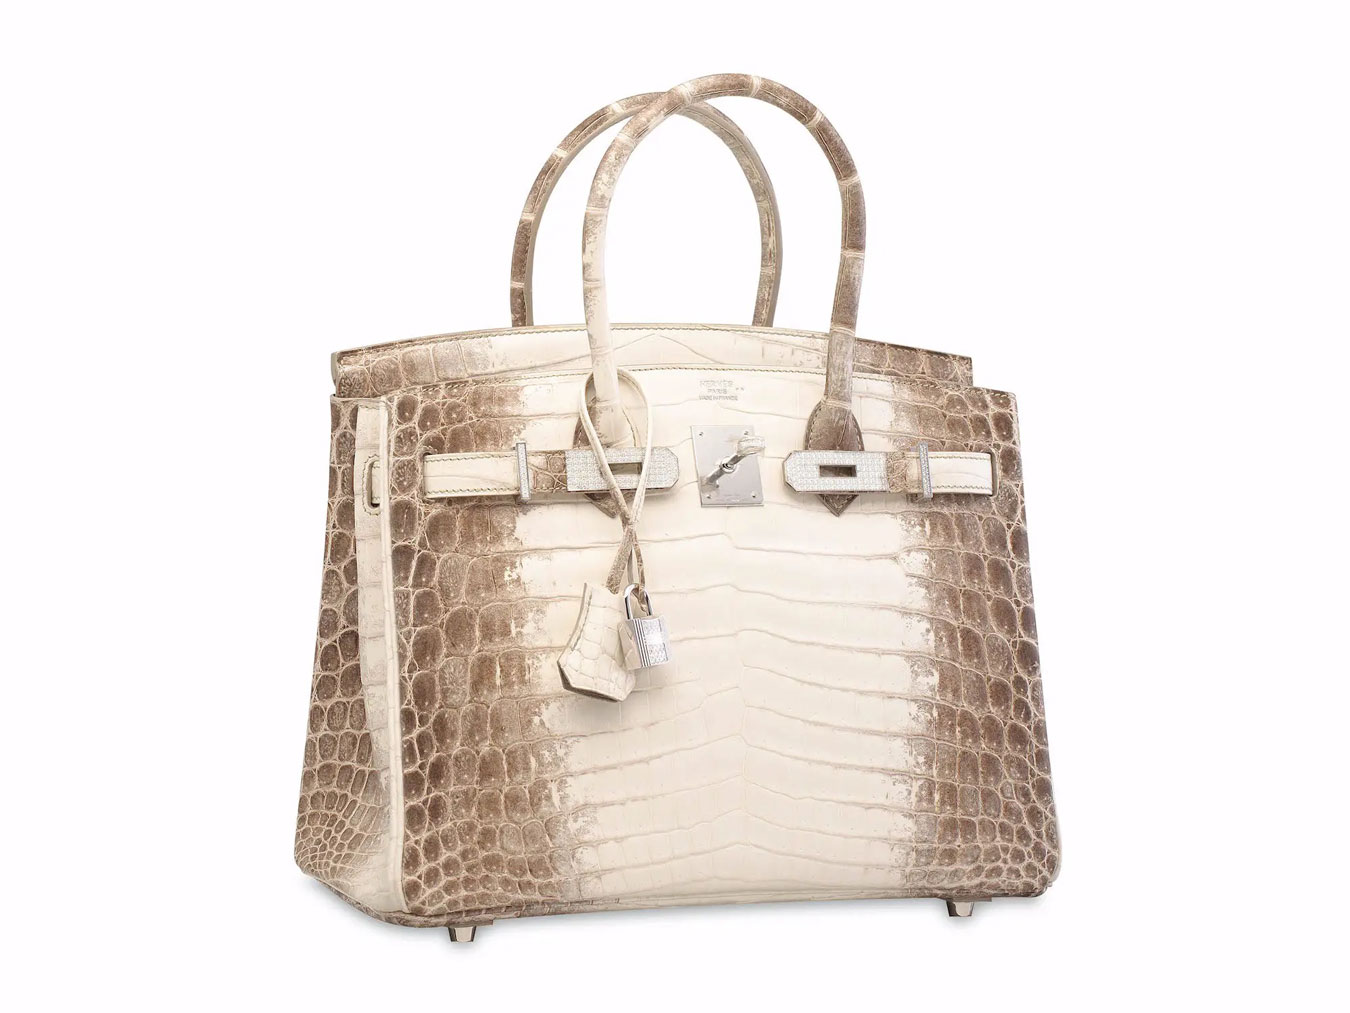 Instantly recognisable, the Hermès Birkin - the most expensive handbag ever sold. Made with Himalayan crocodile skin, 18 karat white gold and diamond hardware detailing on the fastener.